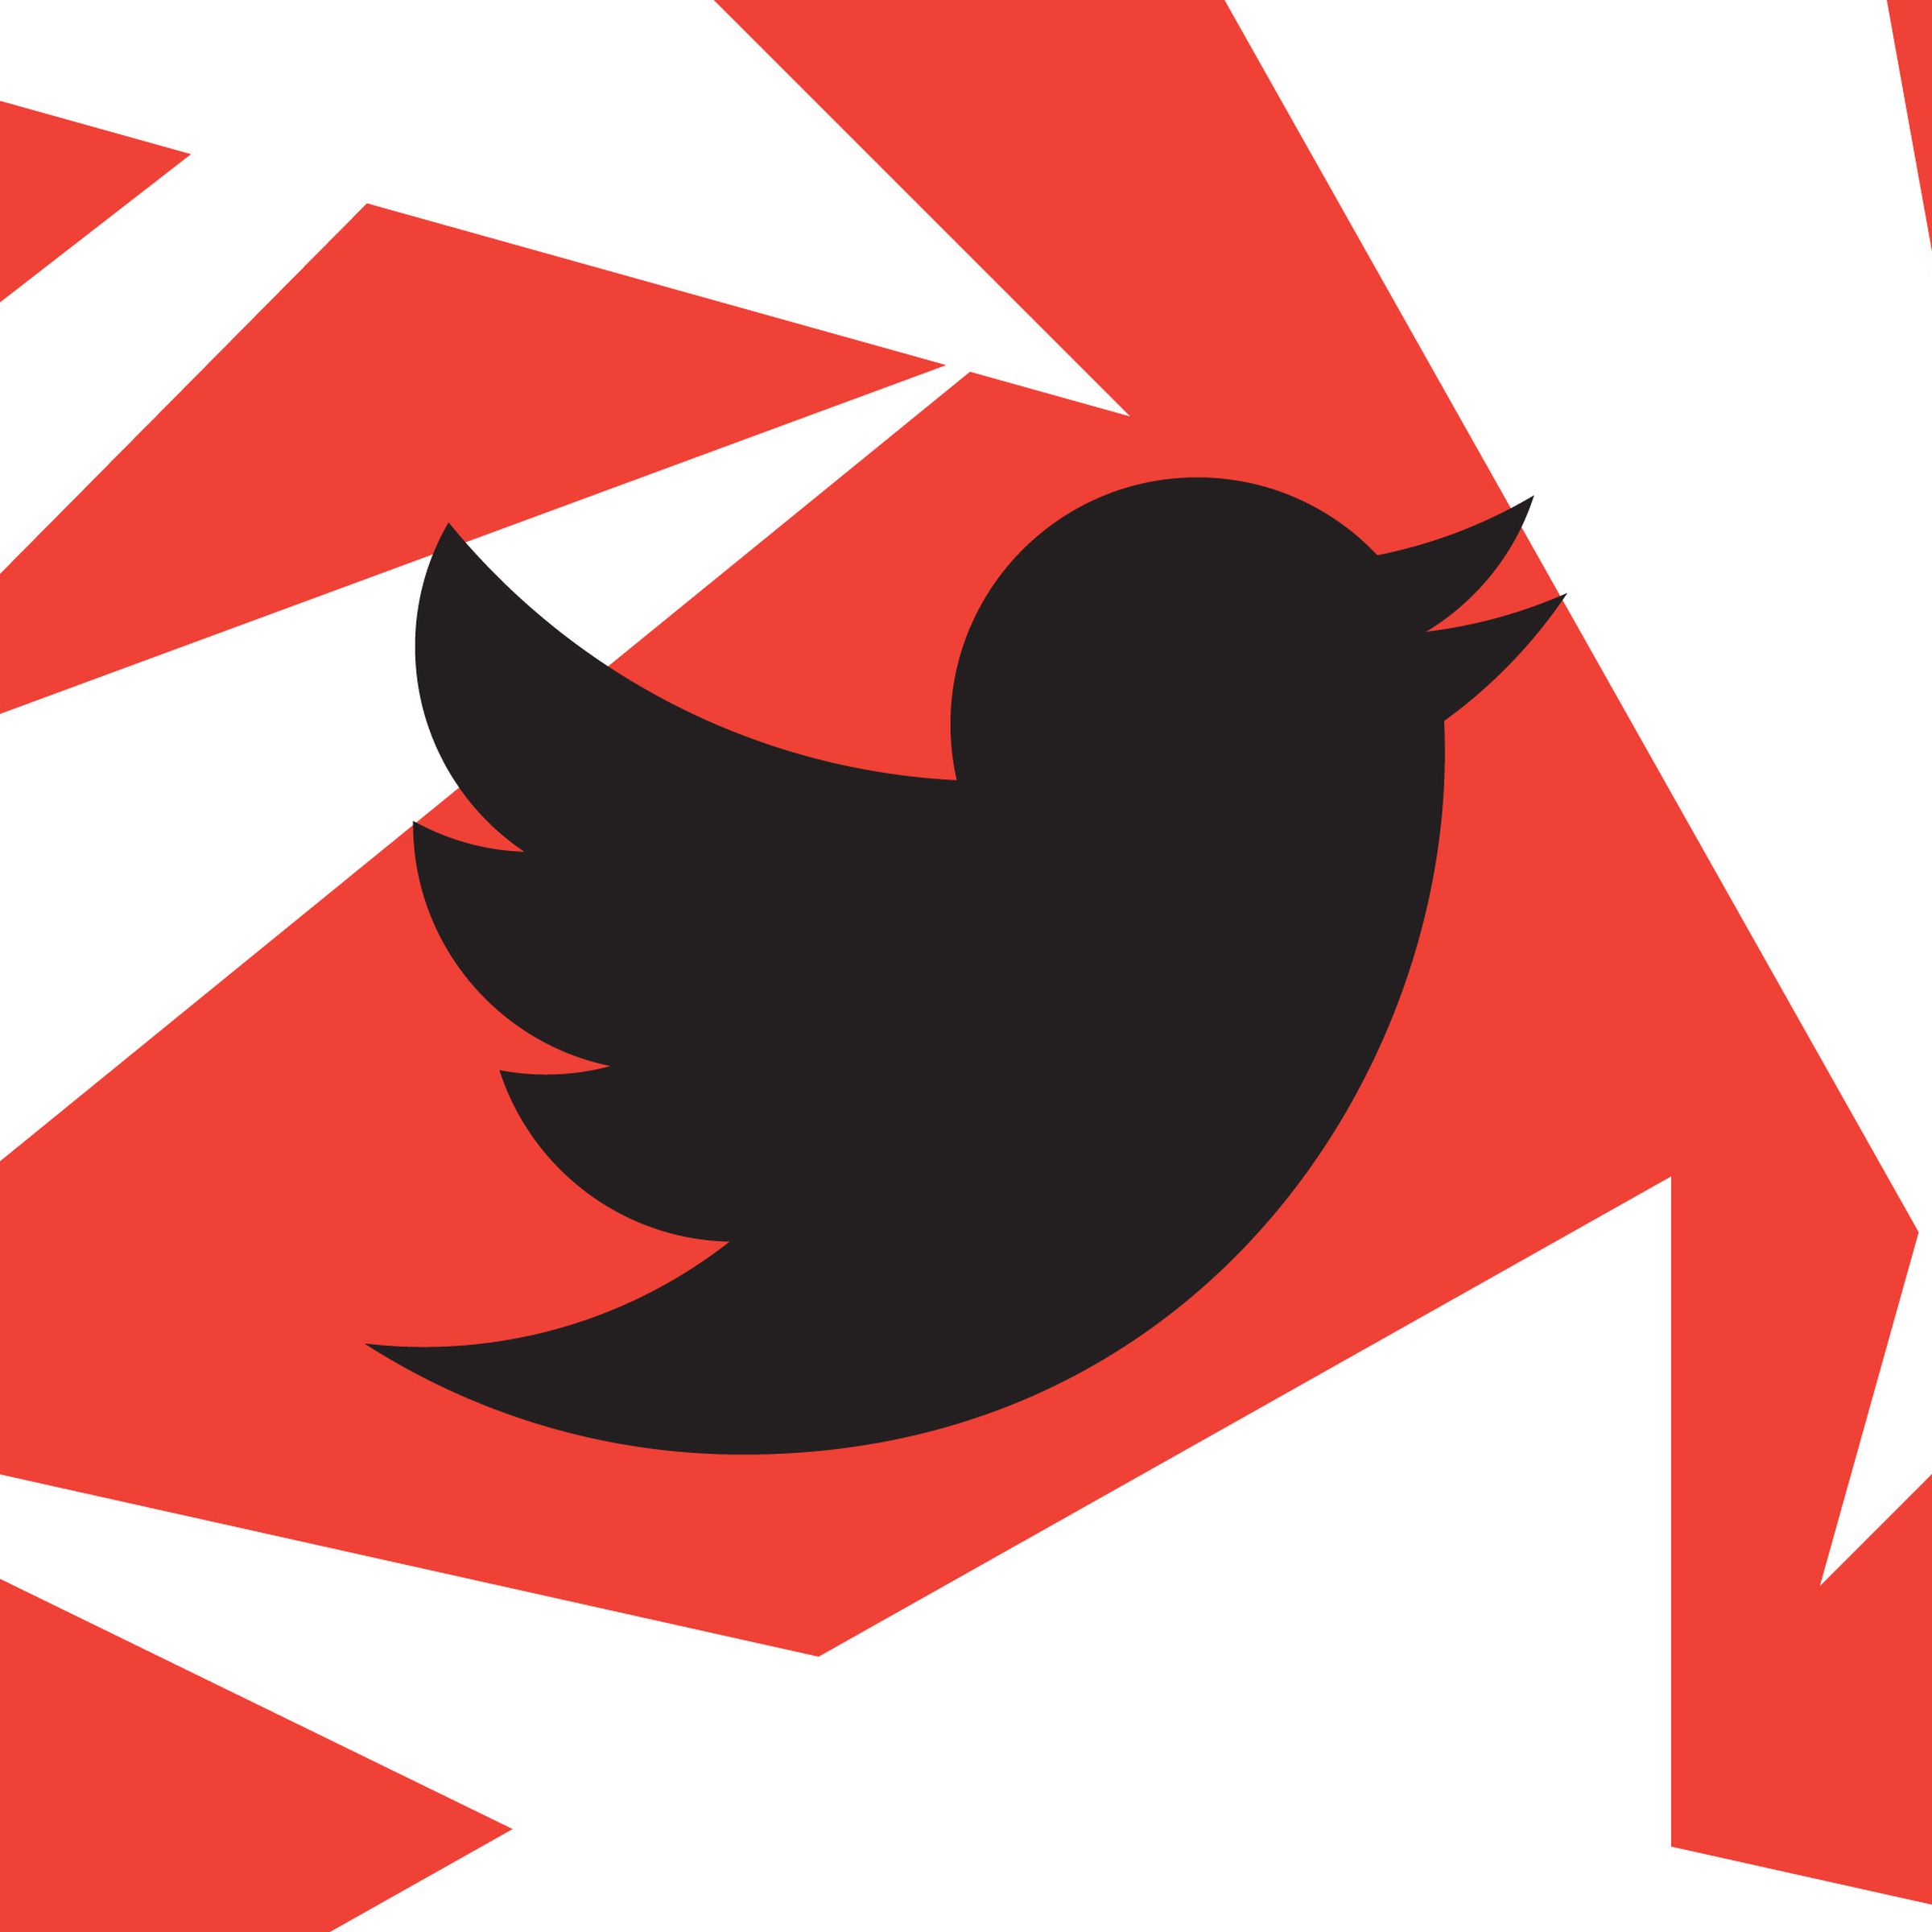 A black Twitter logo over a red and white background